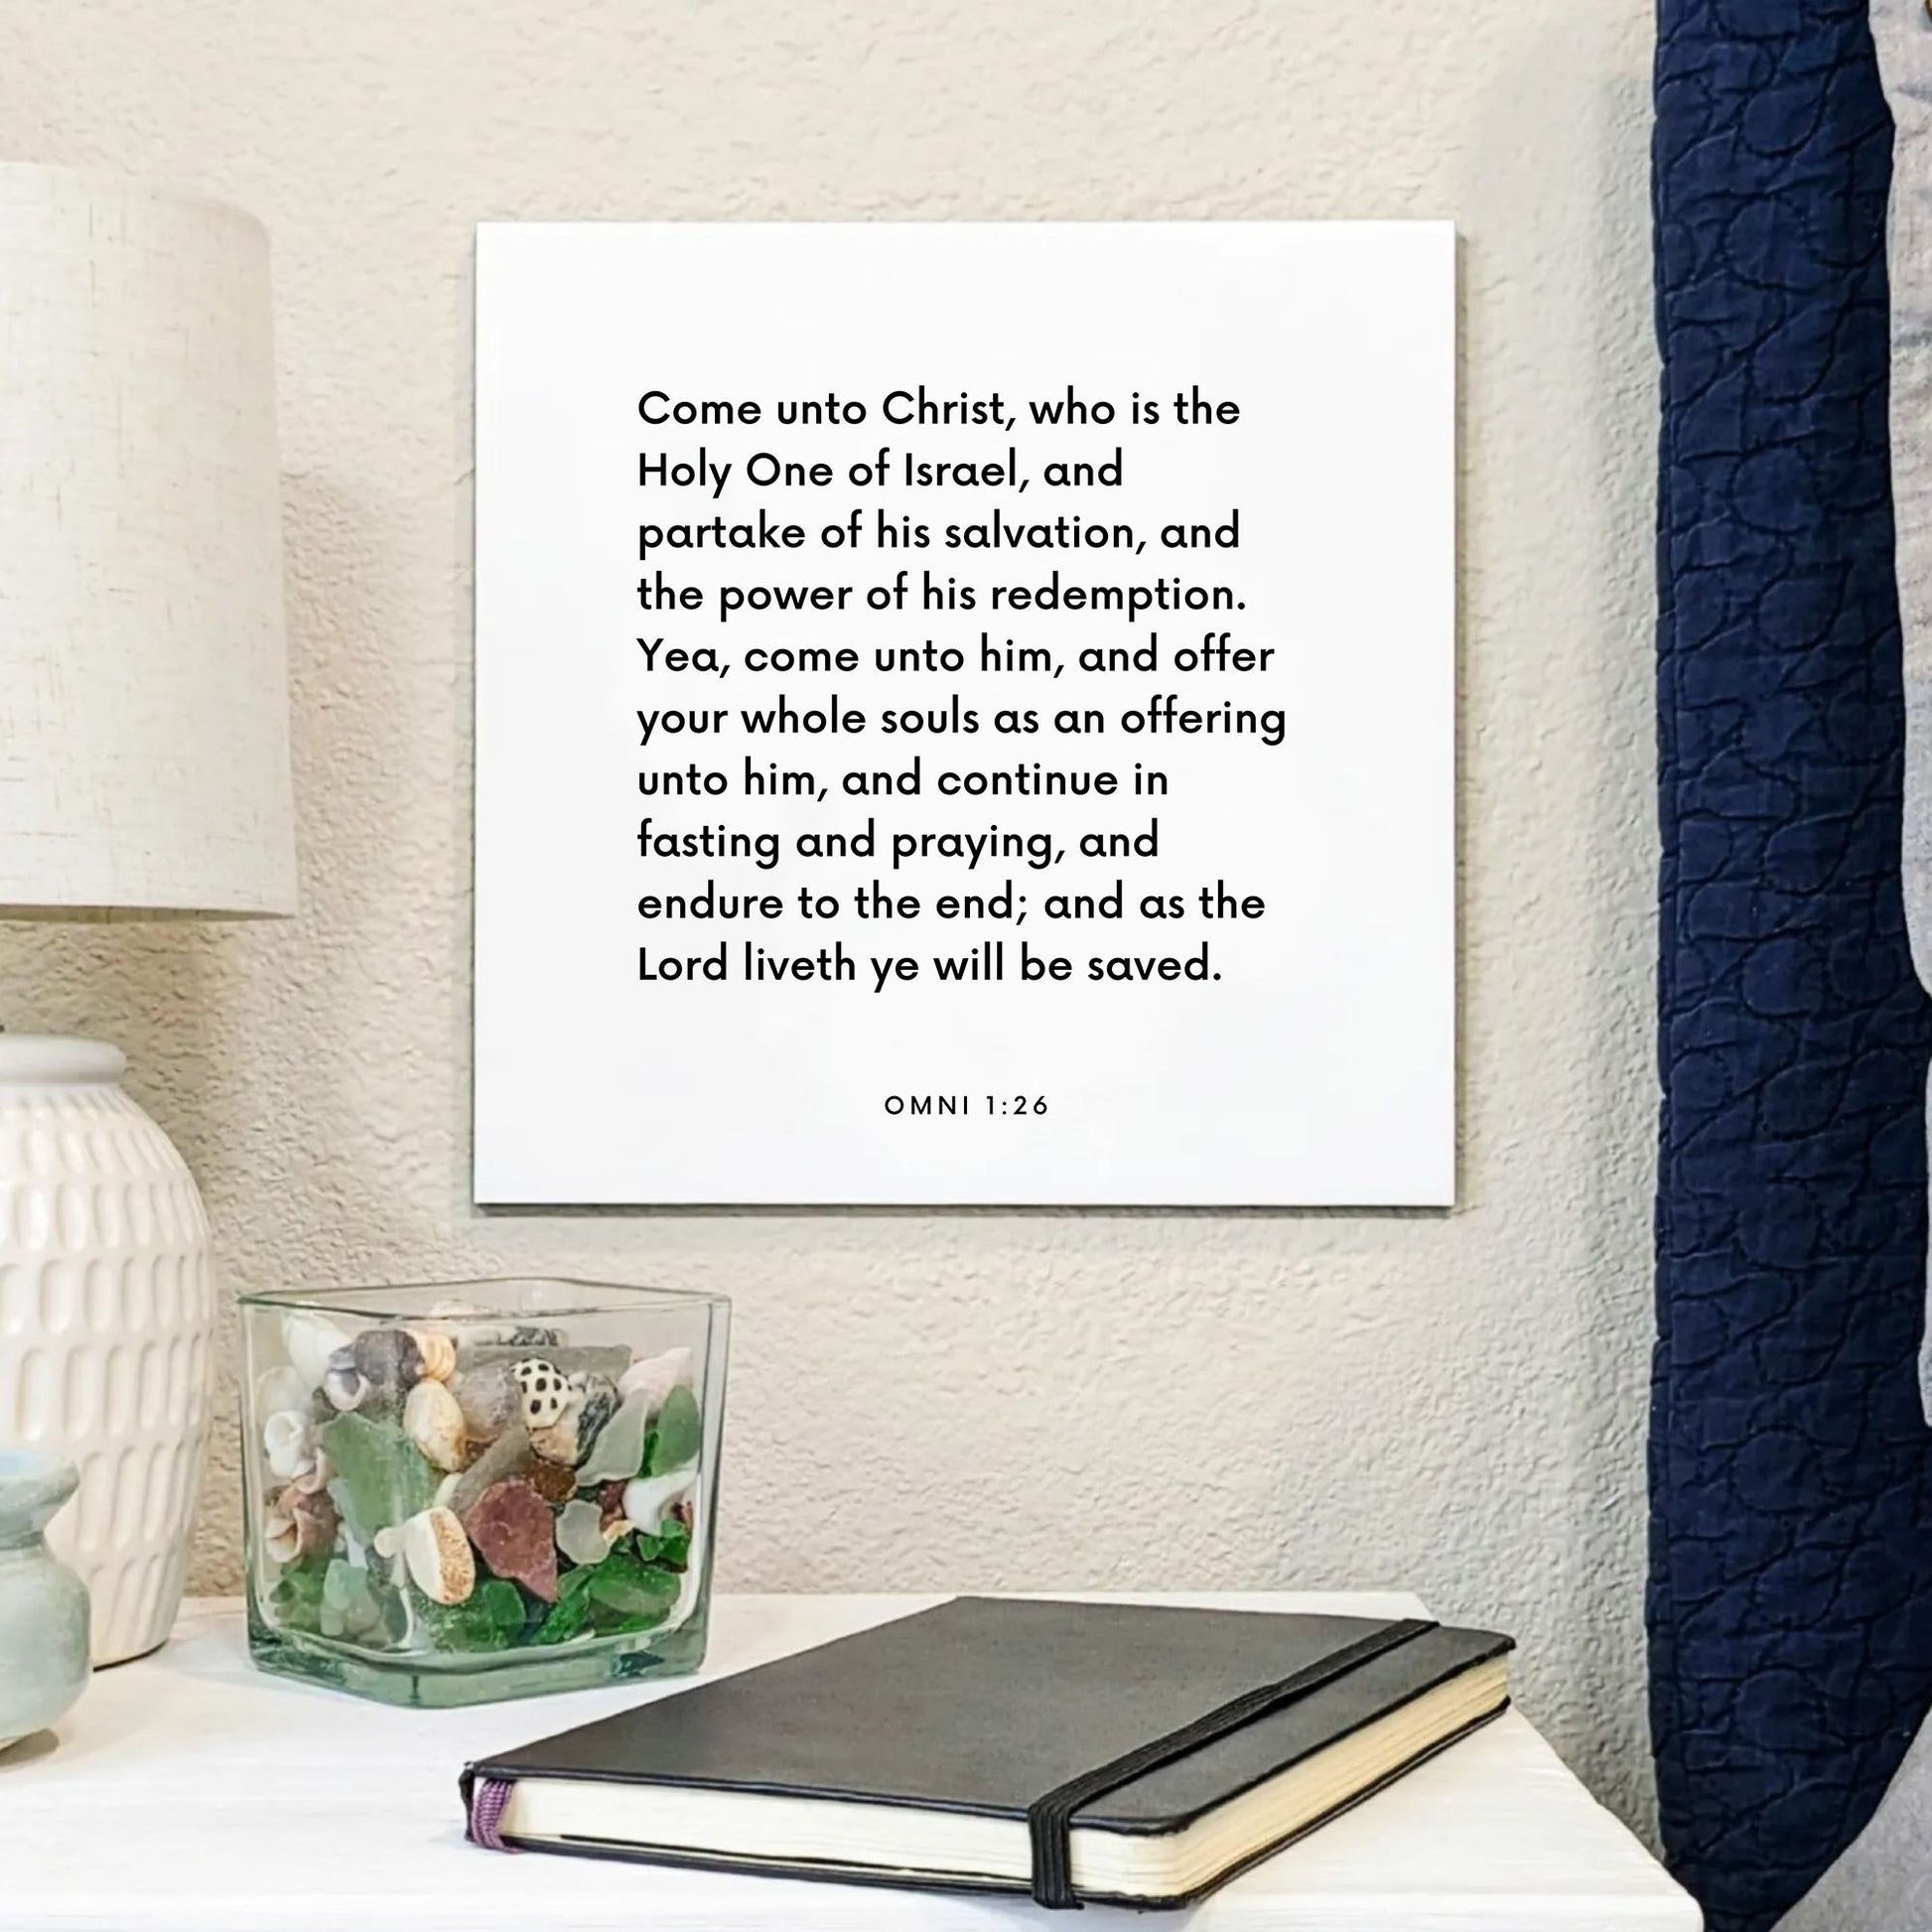 Bedside mouting of the scripture tile for Omni 1:26 - "Offer your whole souls as an offering unto him"